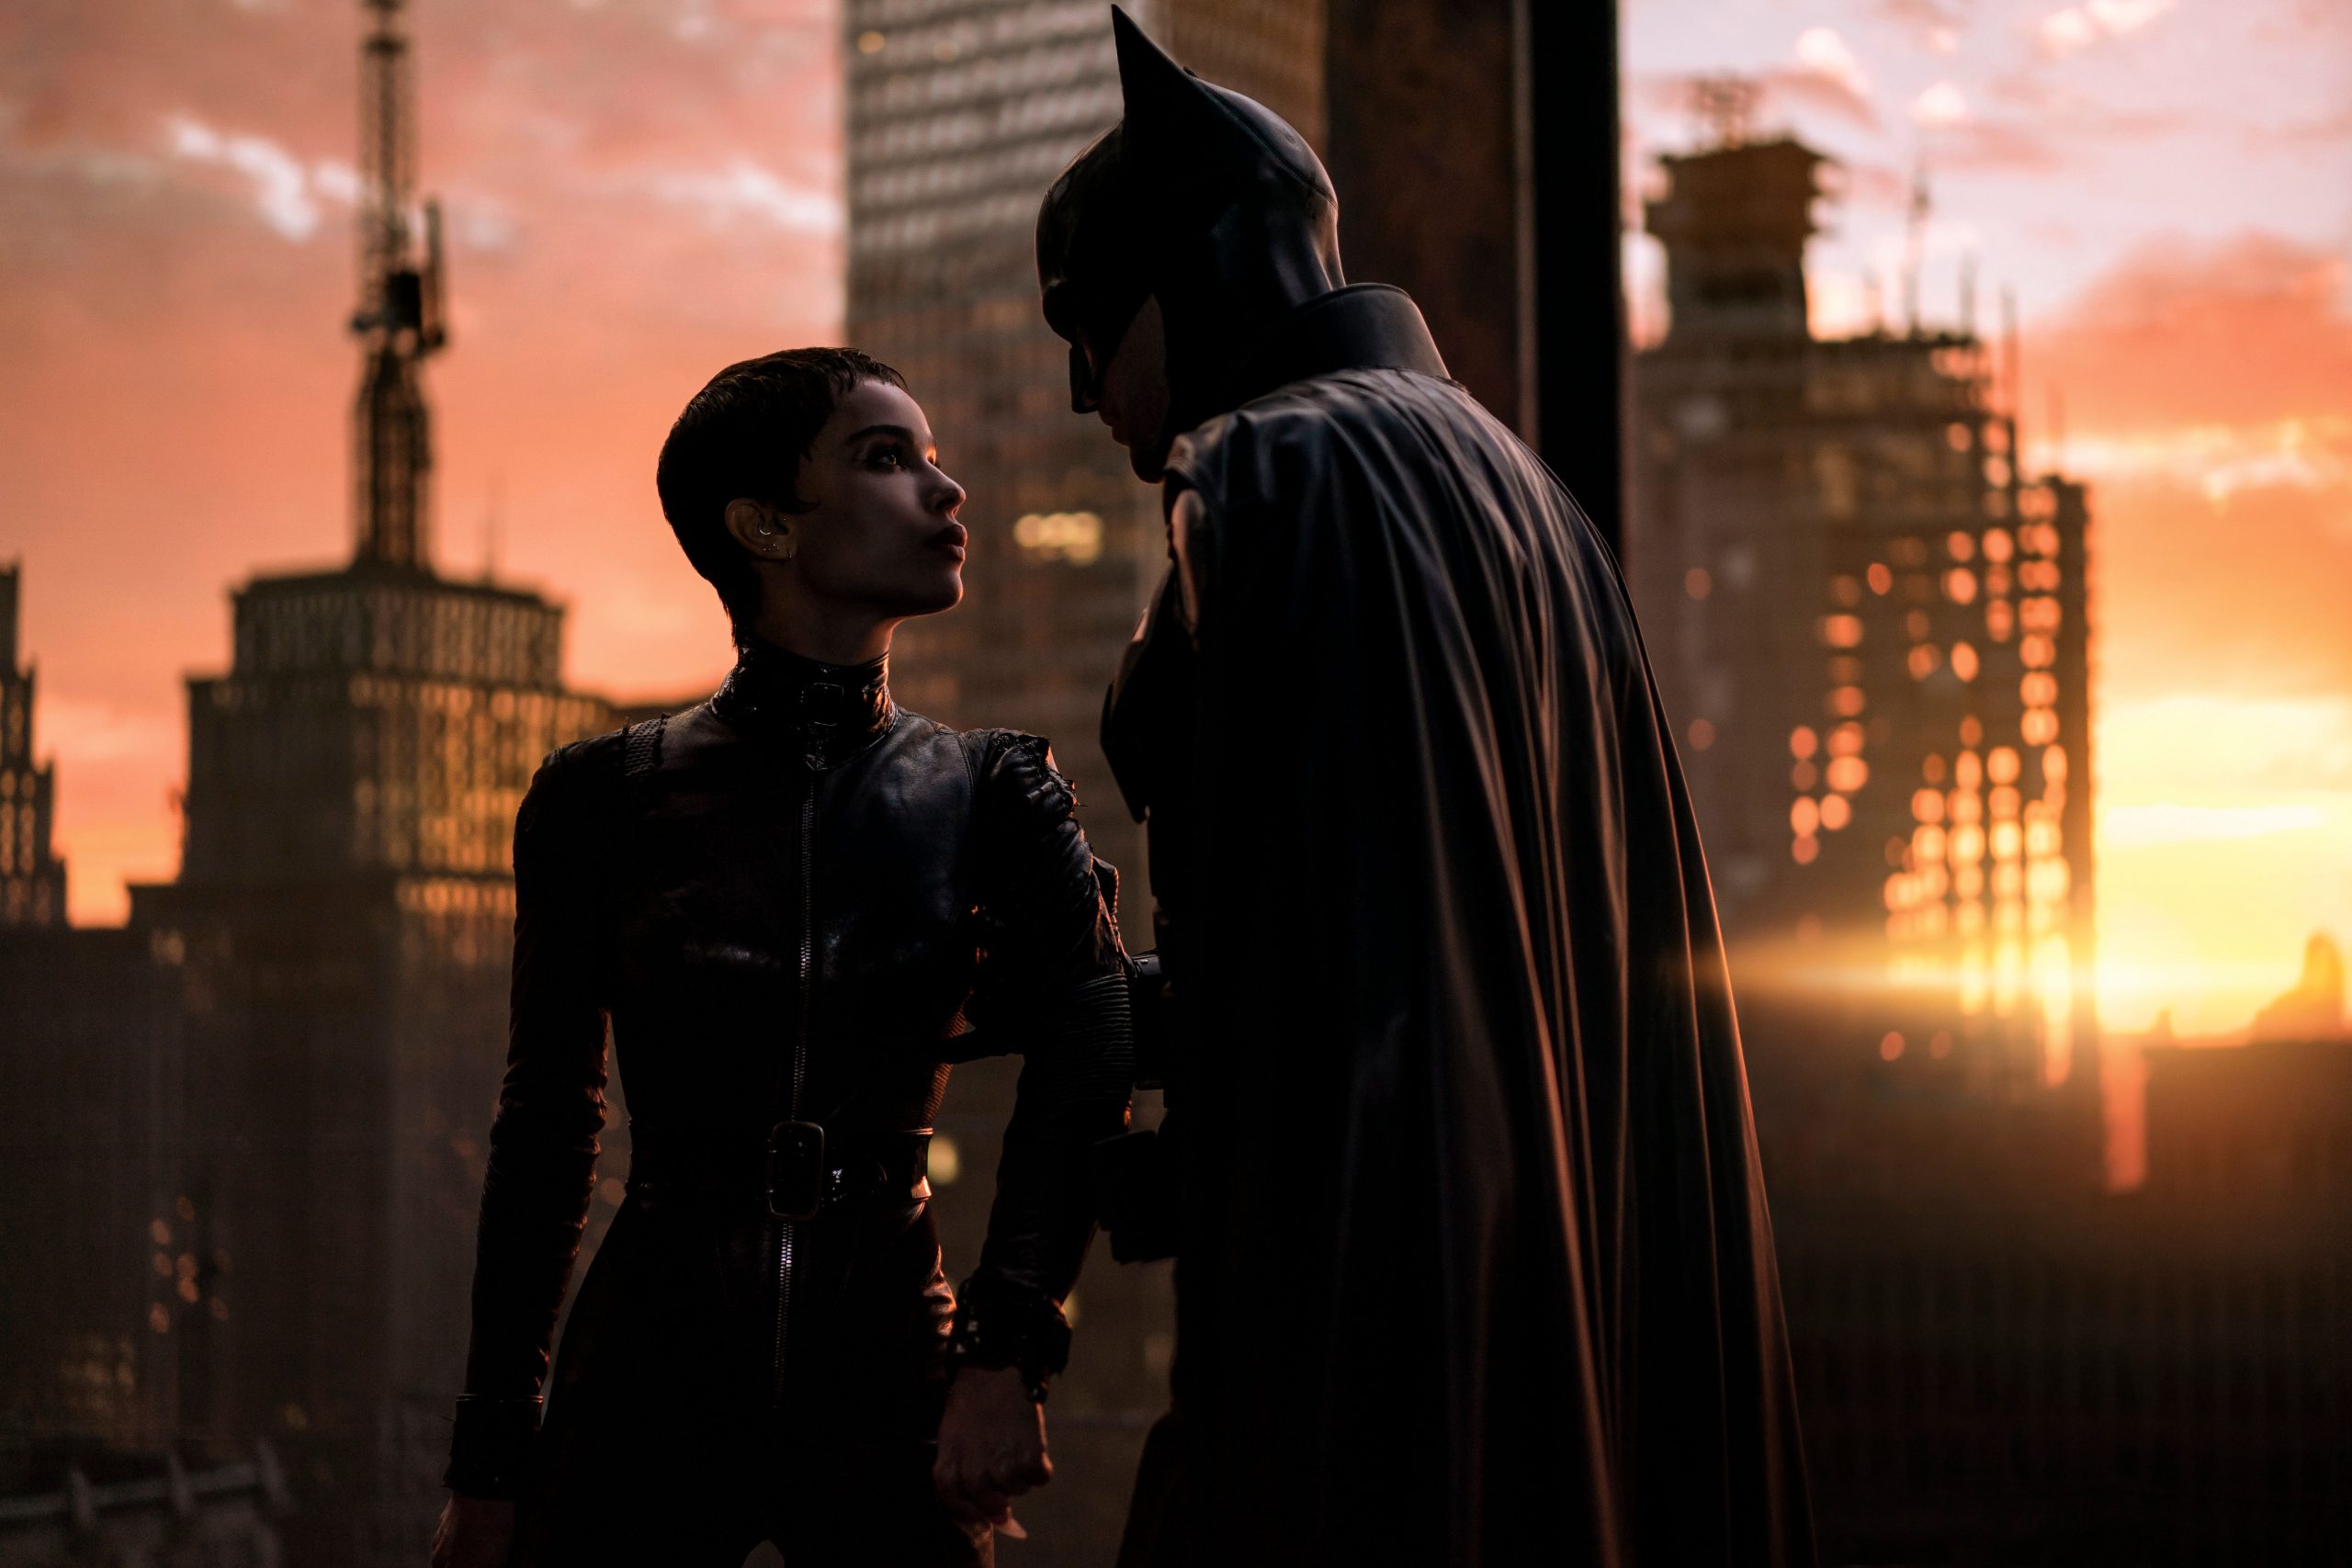 ‘The Batman’ box office success gives movie theatres renewed hope